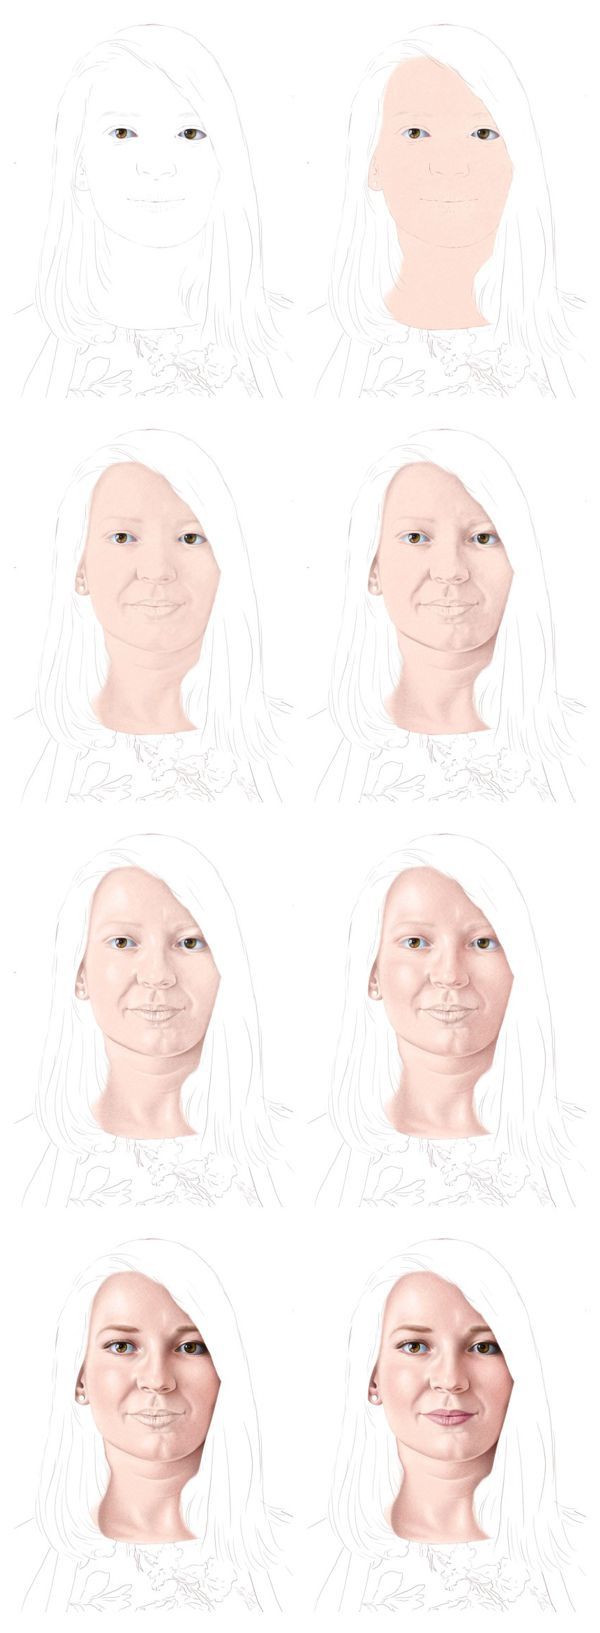 Color Pencil Portraits - How to Shade the Skin